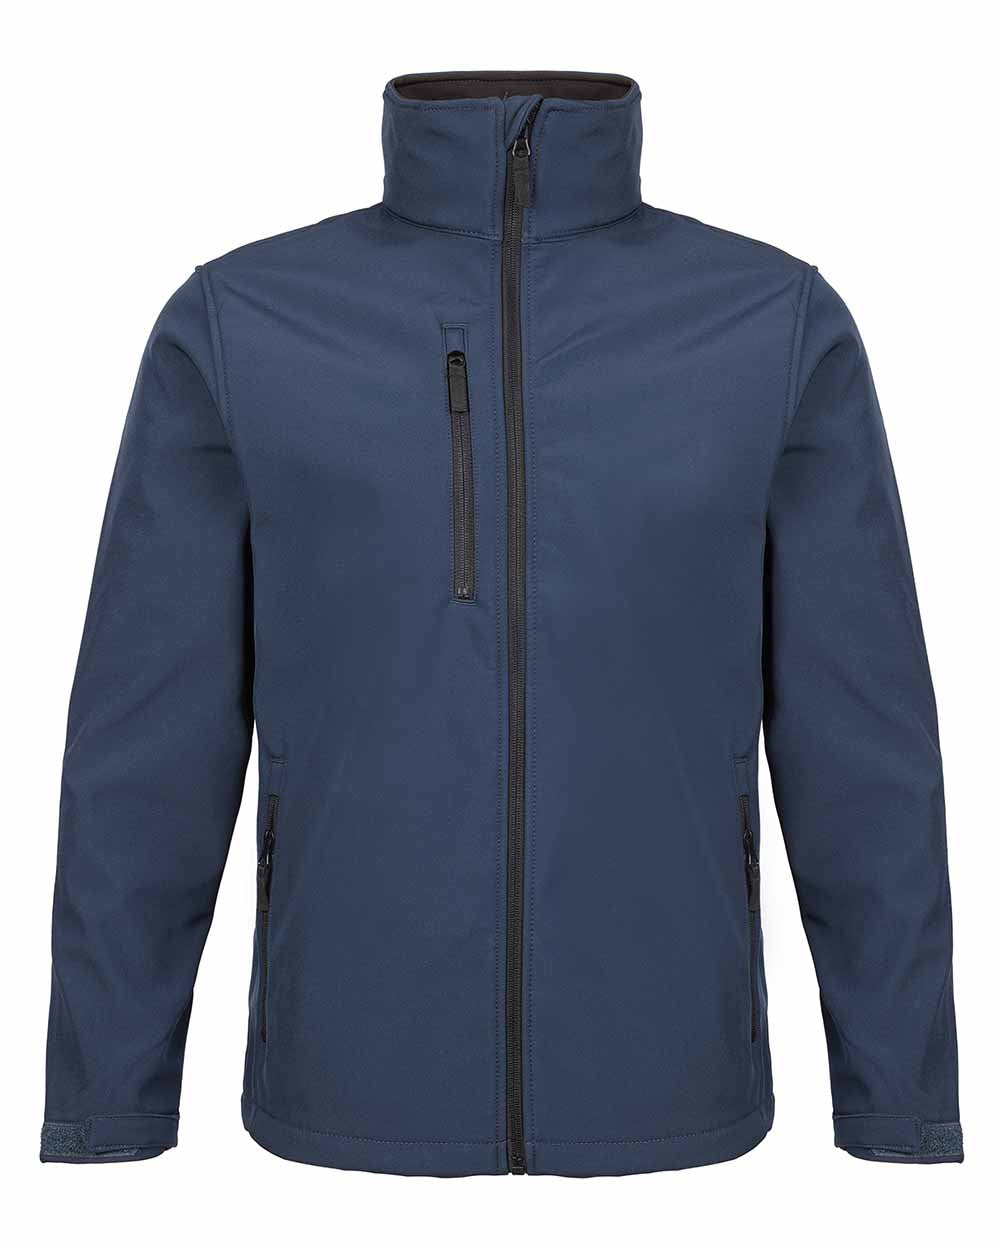 Navy Blue coloured Fort Selkirk Softshell Waterproof Jacket on white background 